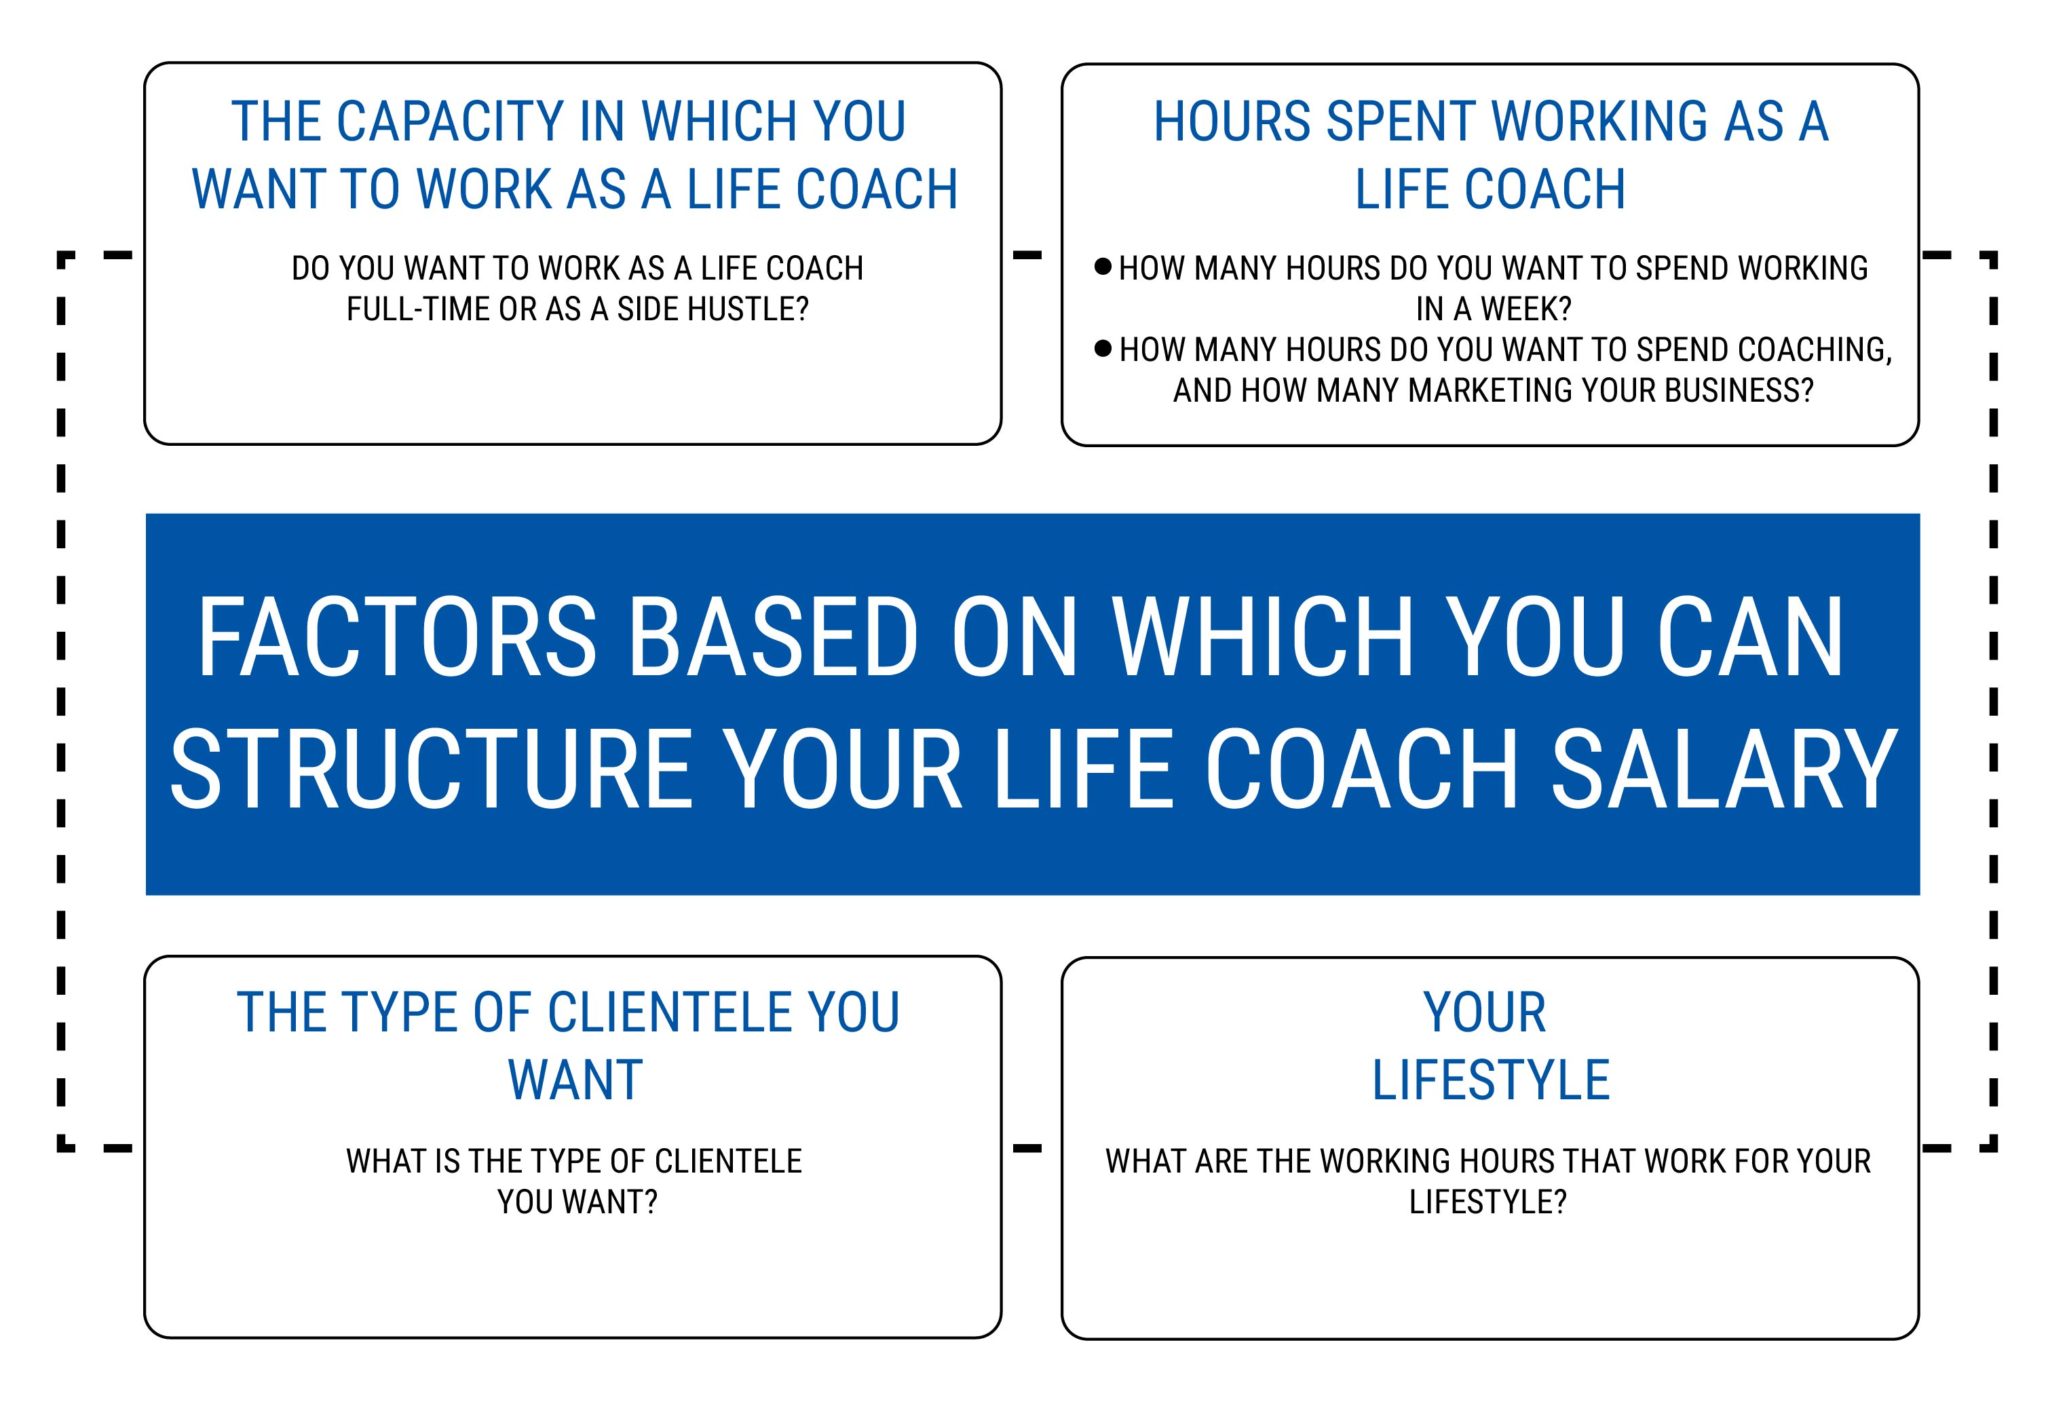 FACTORS BASED ON WHICH YOU CAN STRUCTURE YOUR LIFE COACH SALARY